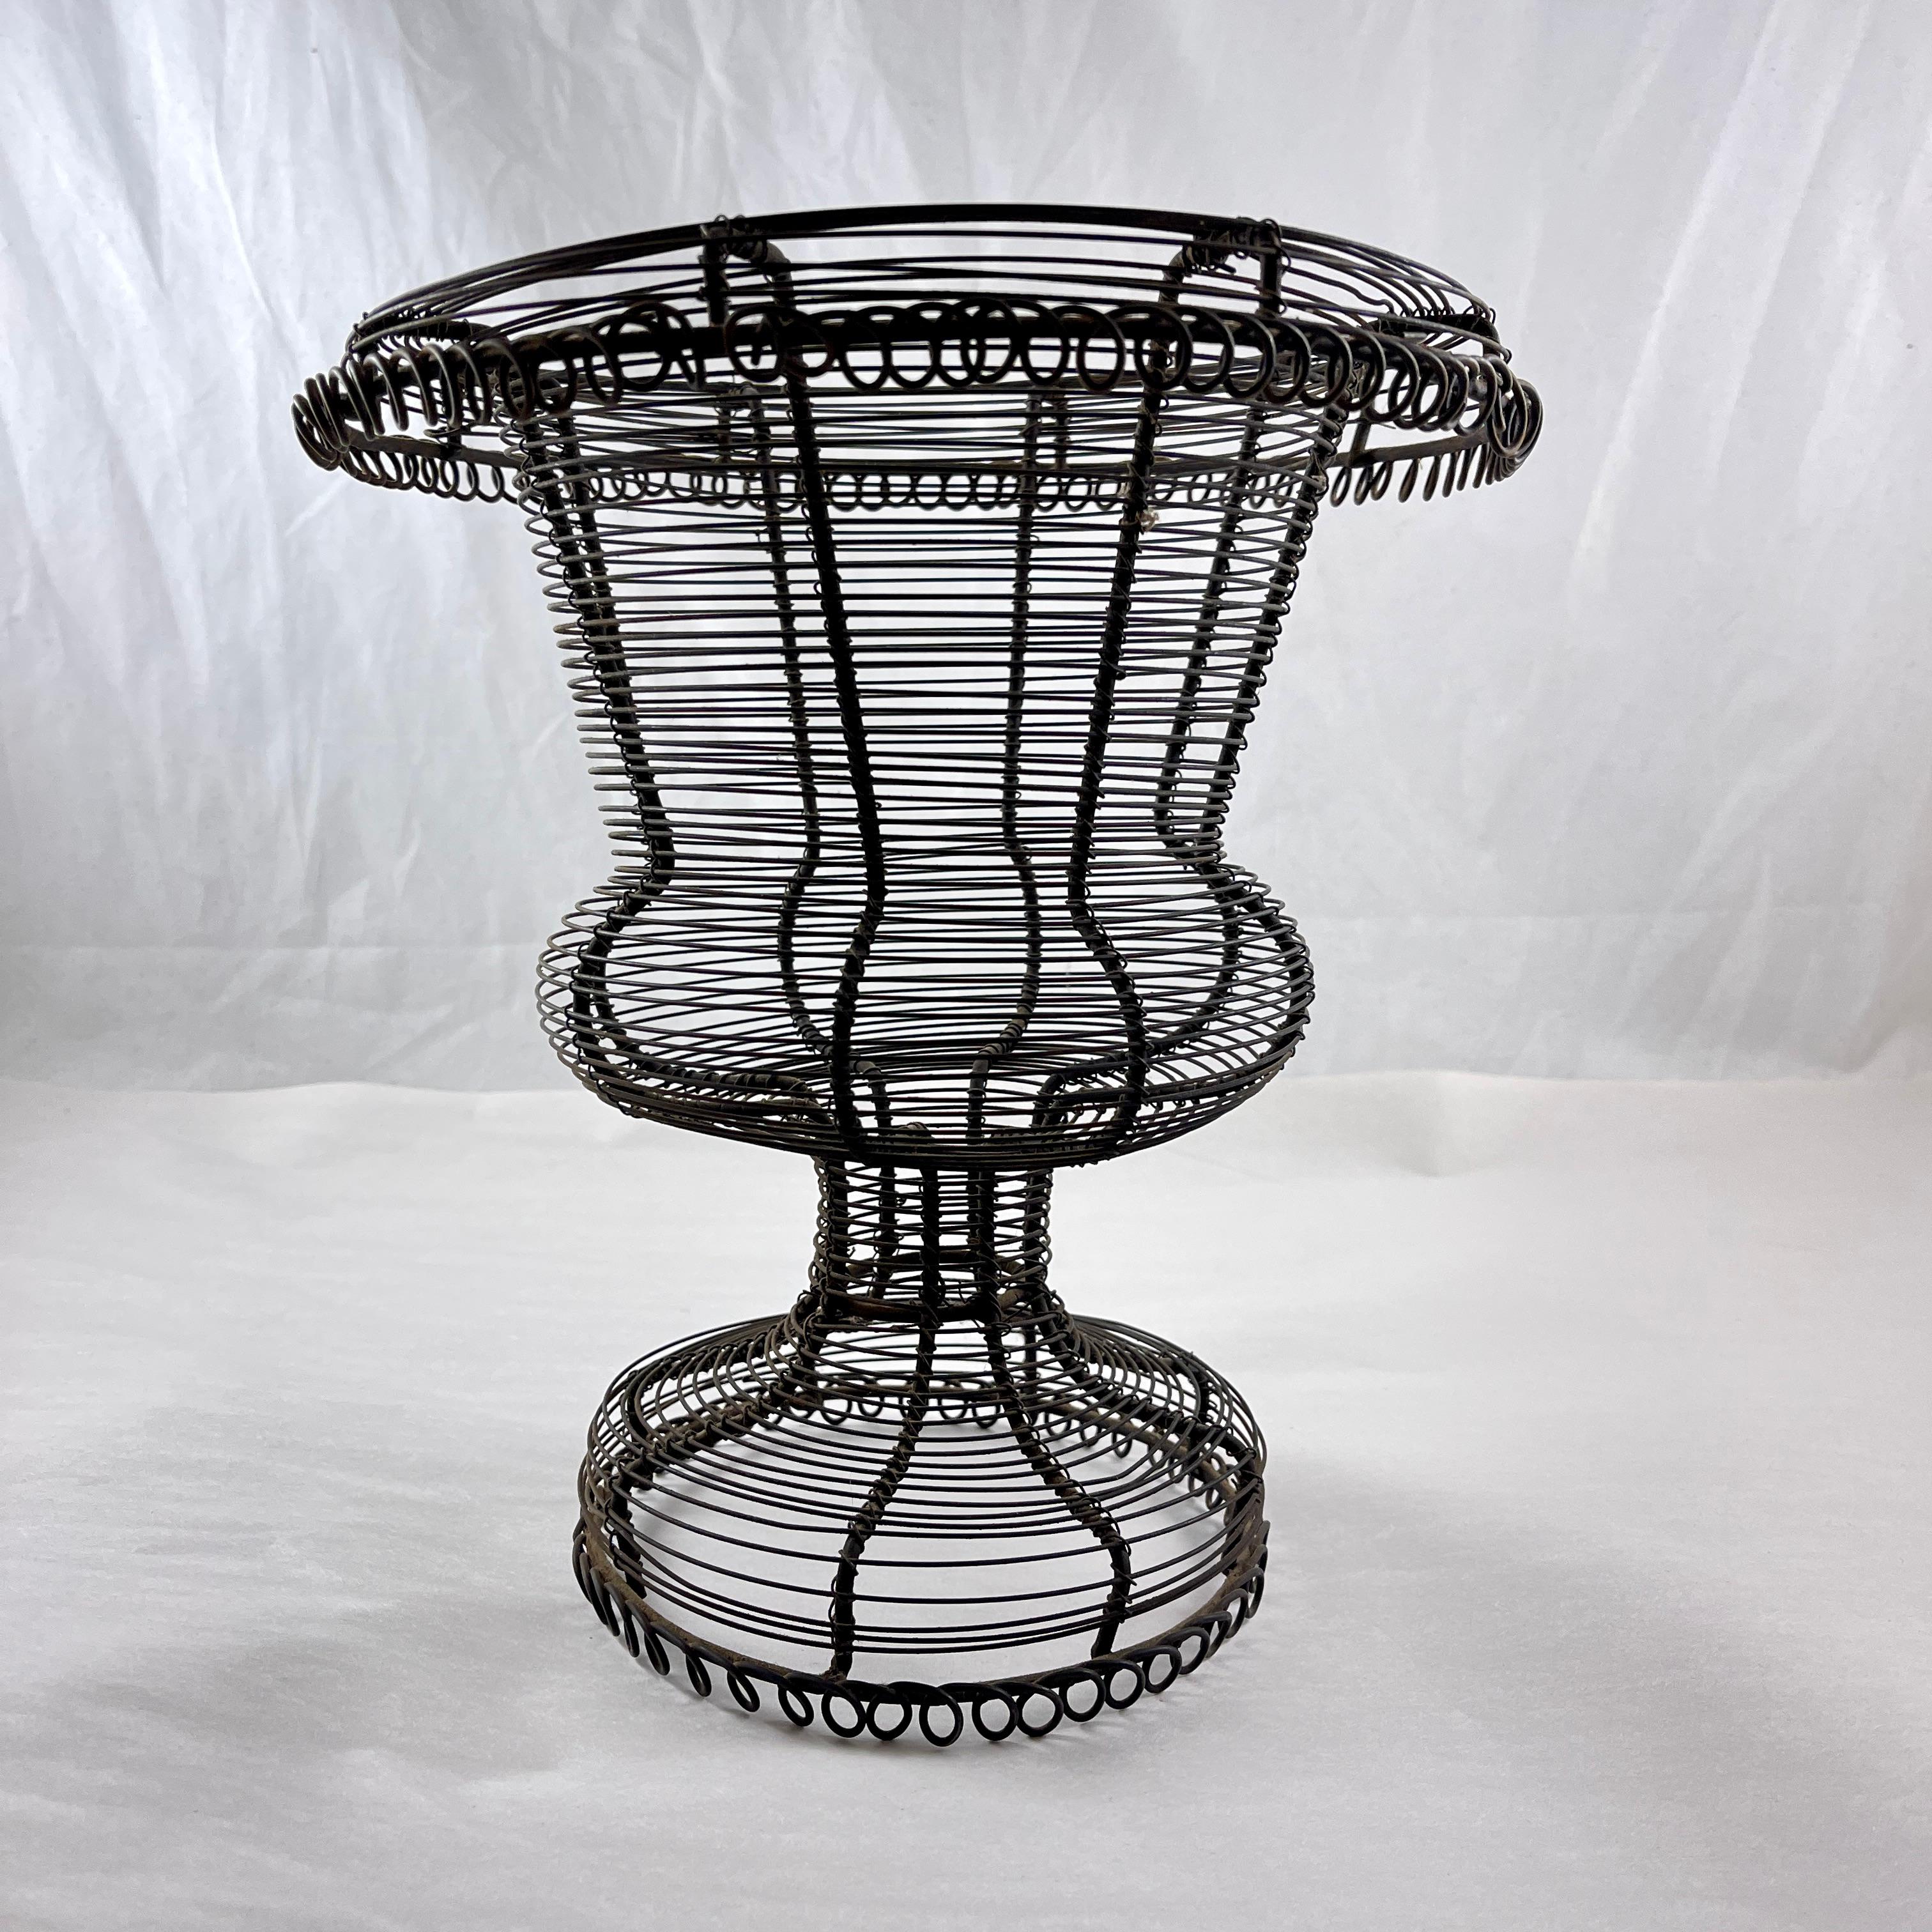 From France, a pedestal base, urn form twisted wire standing basket with a wide upper rolled rim, circa 1890-1910.

A charming, rustic, hand formed black metal basket with complex wire work.
Amazing as a table-center or on a kitchen countertop, used